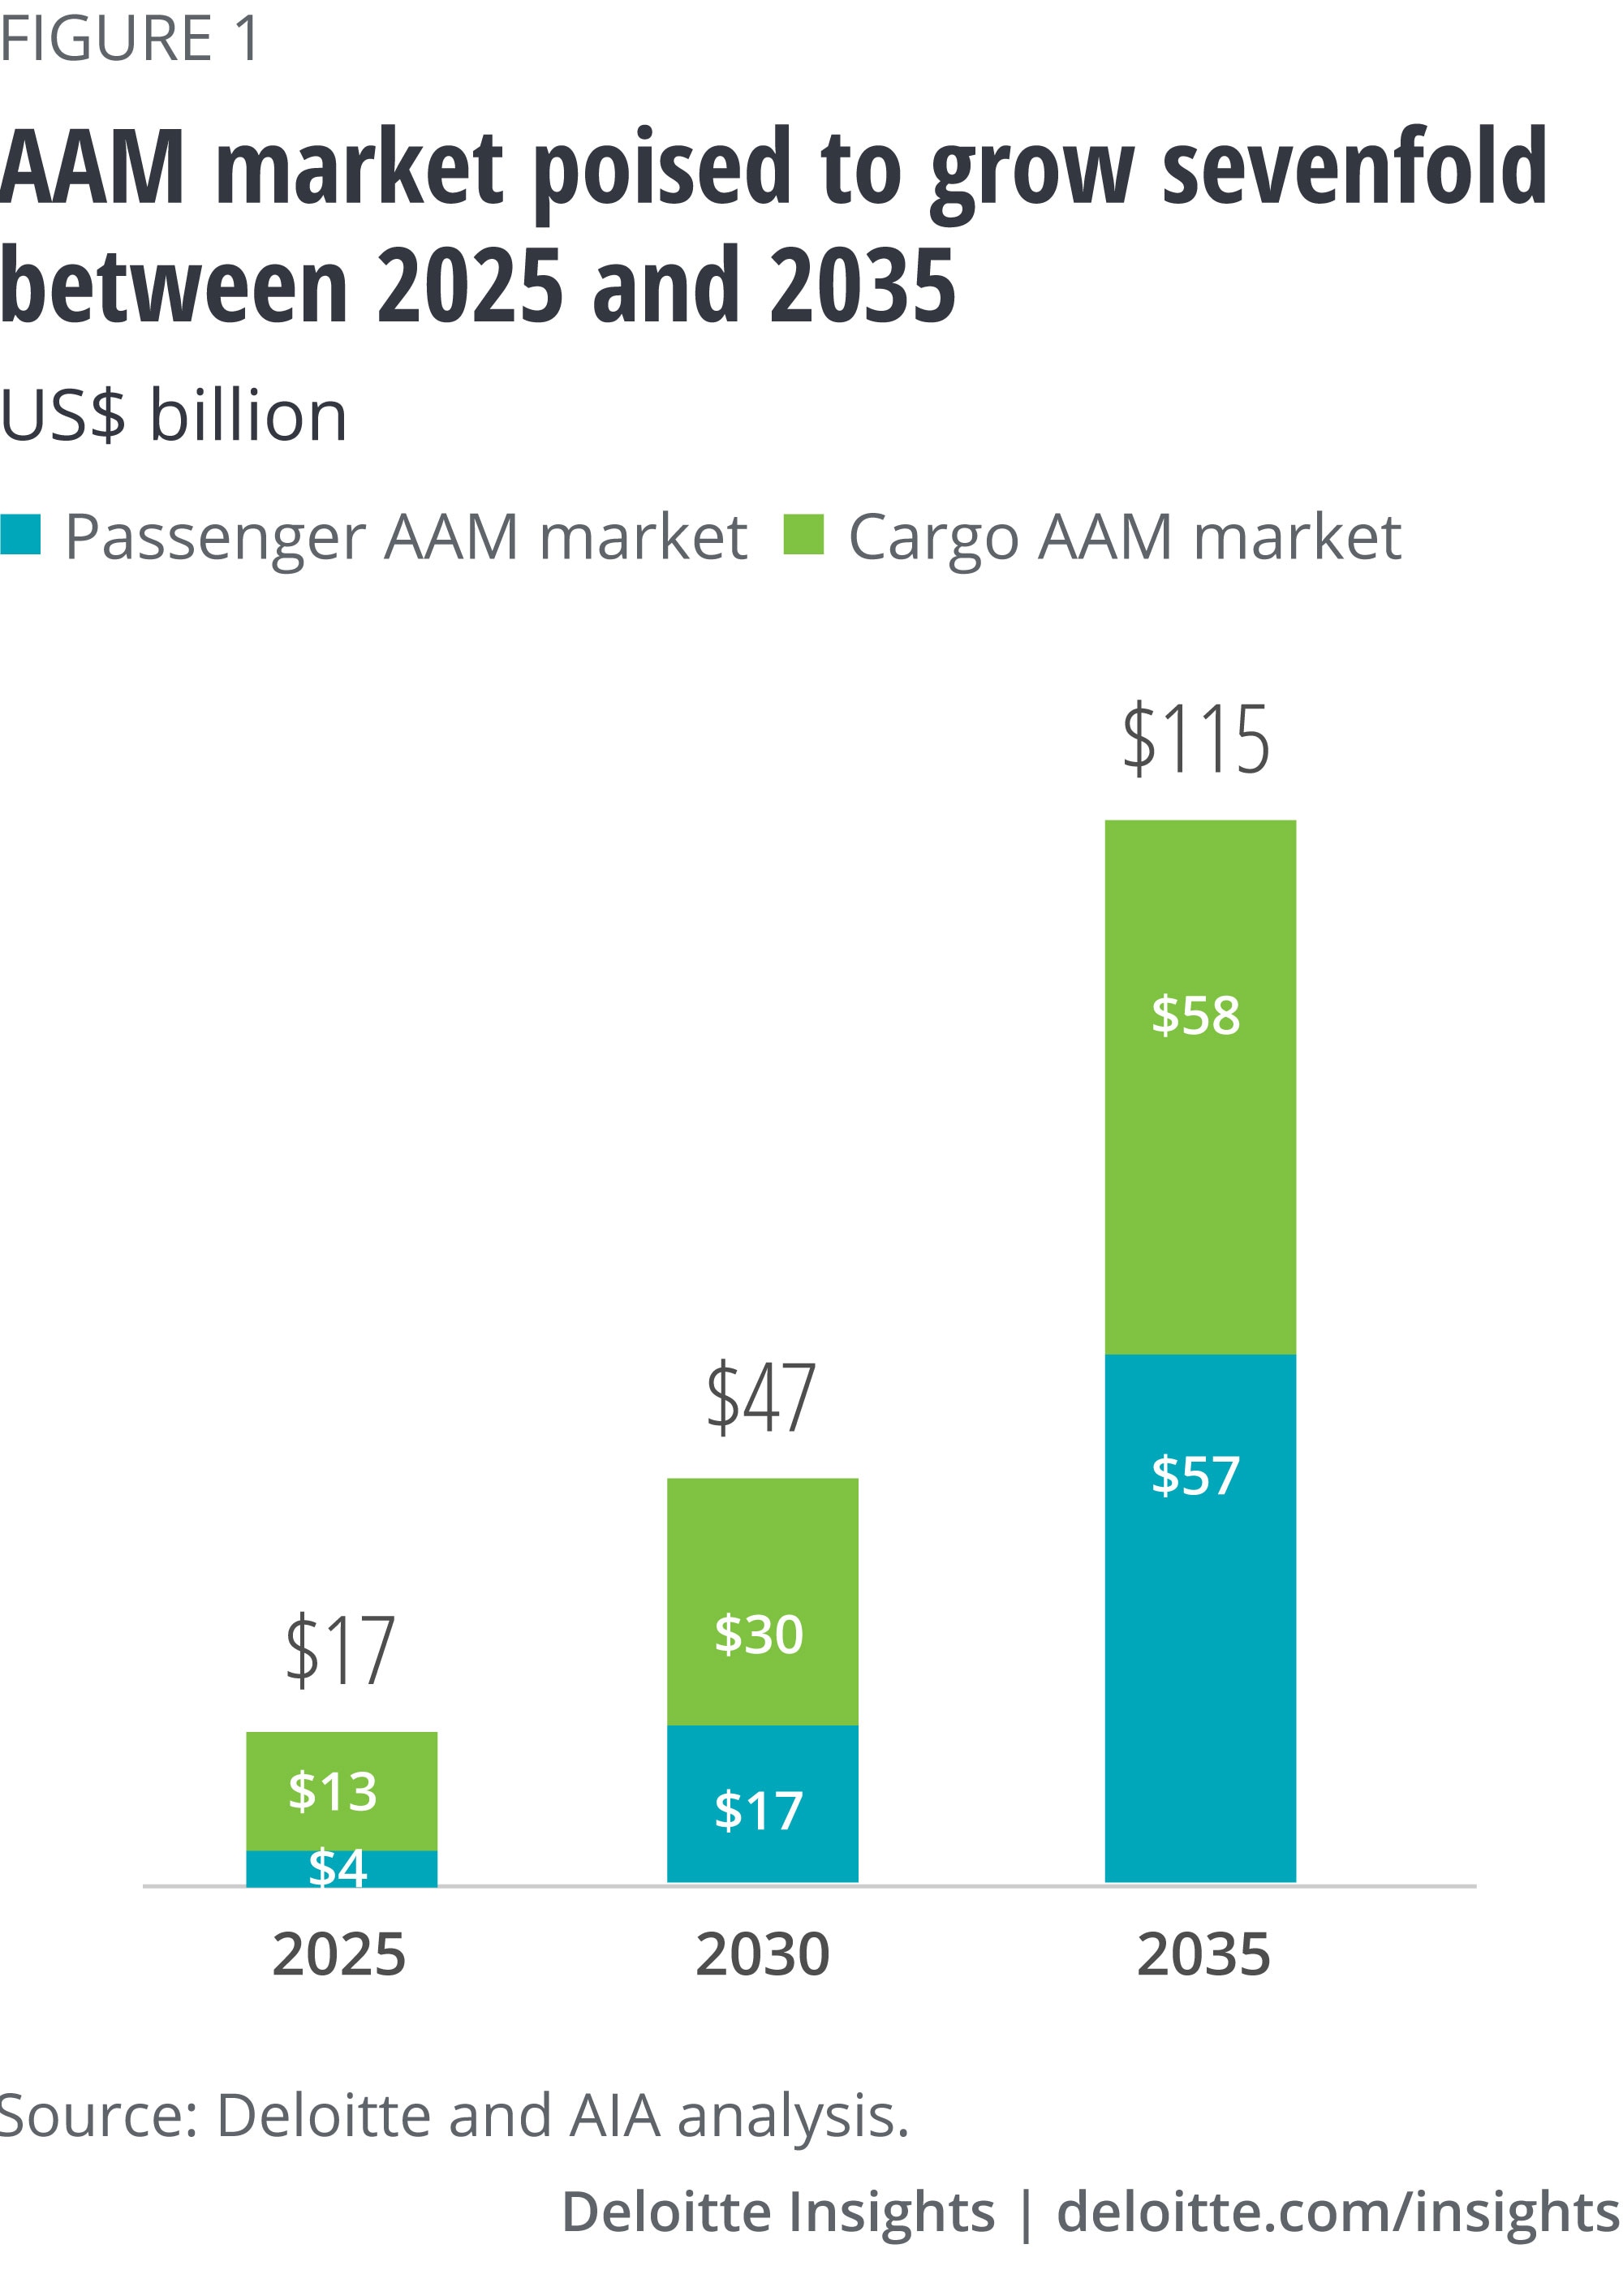 AAM market poised to grow seven-fold between 2025 to 2035